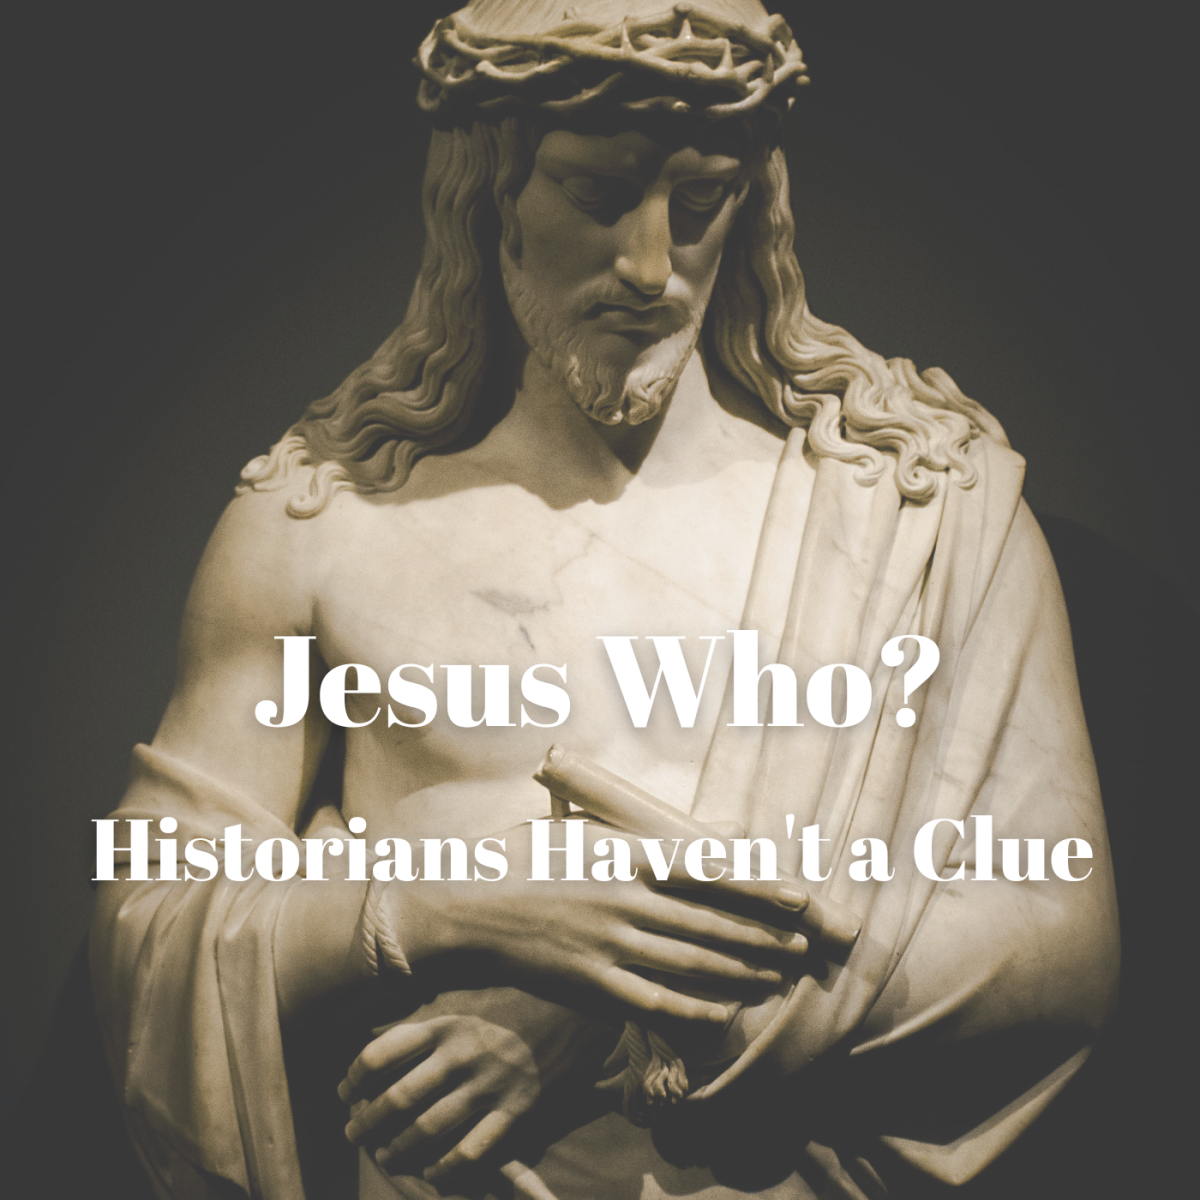 Is There Any Historical Proof for the Existence of Jesus?